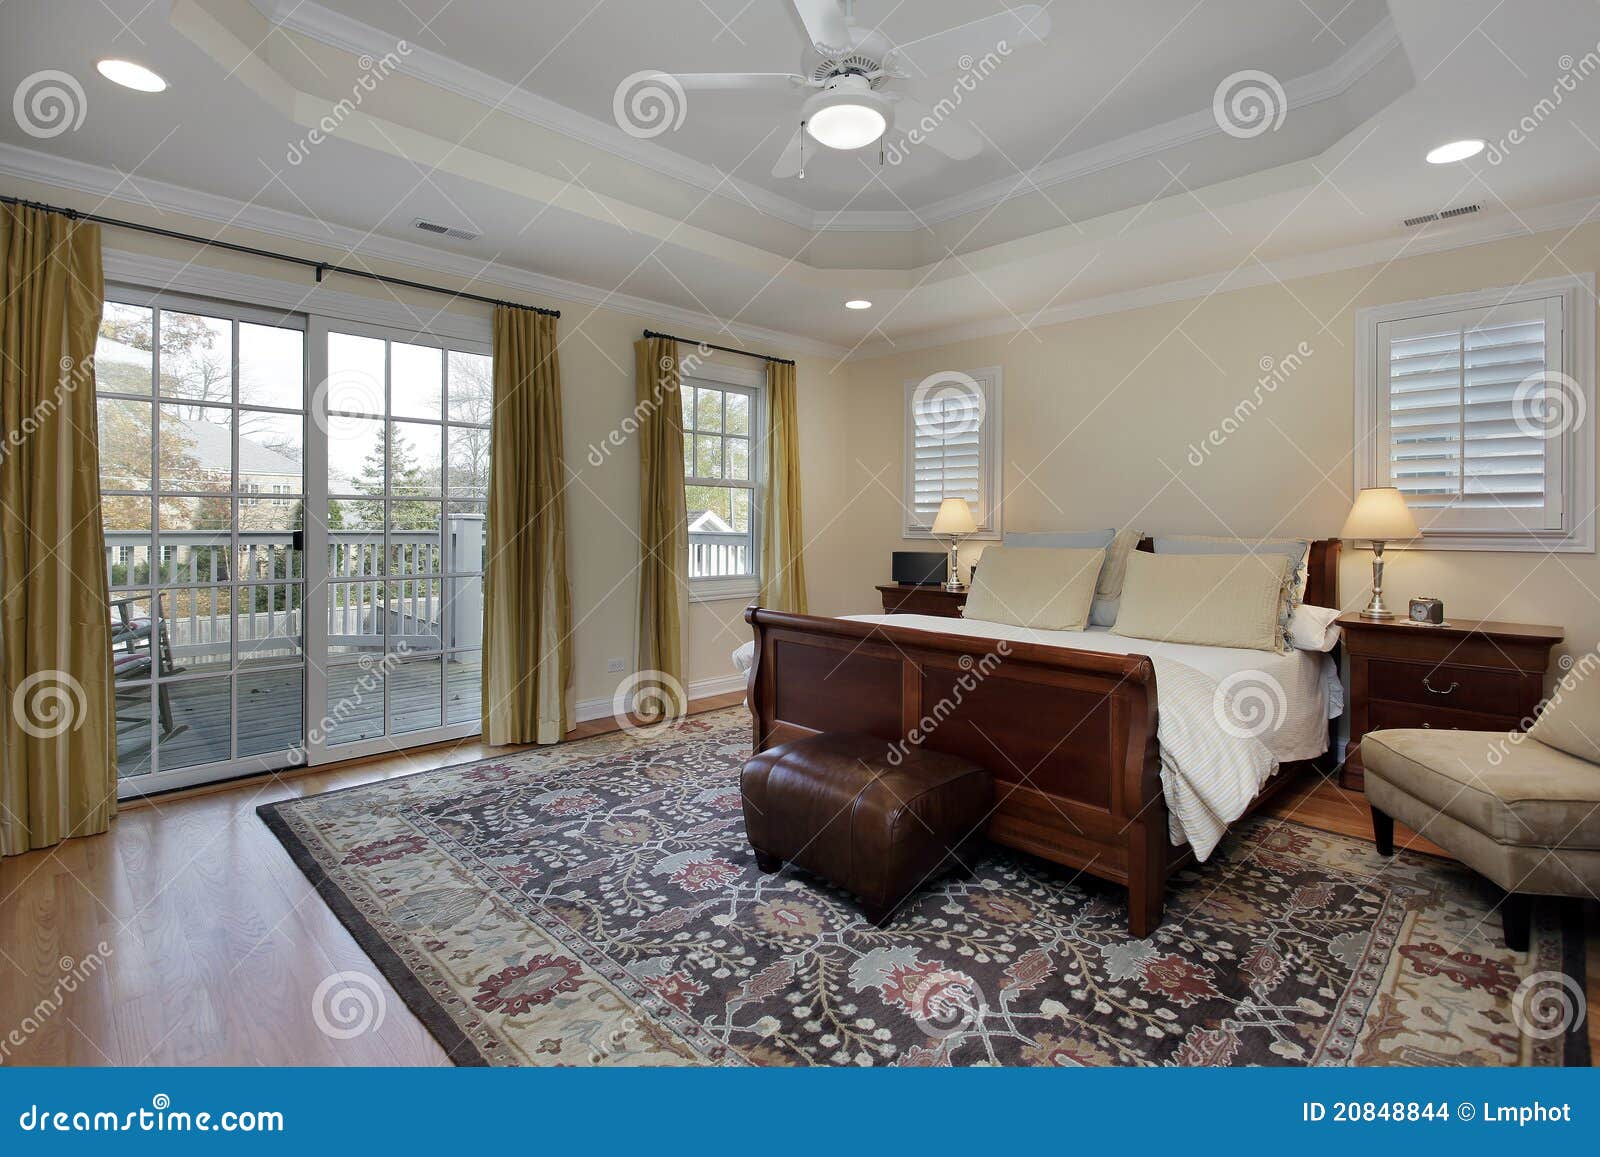 Master Bedroom With Tray Ceiling Stock Photo Image Of Bedroom